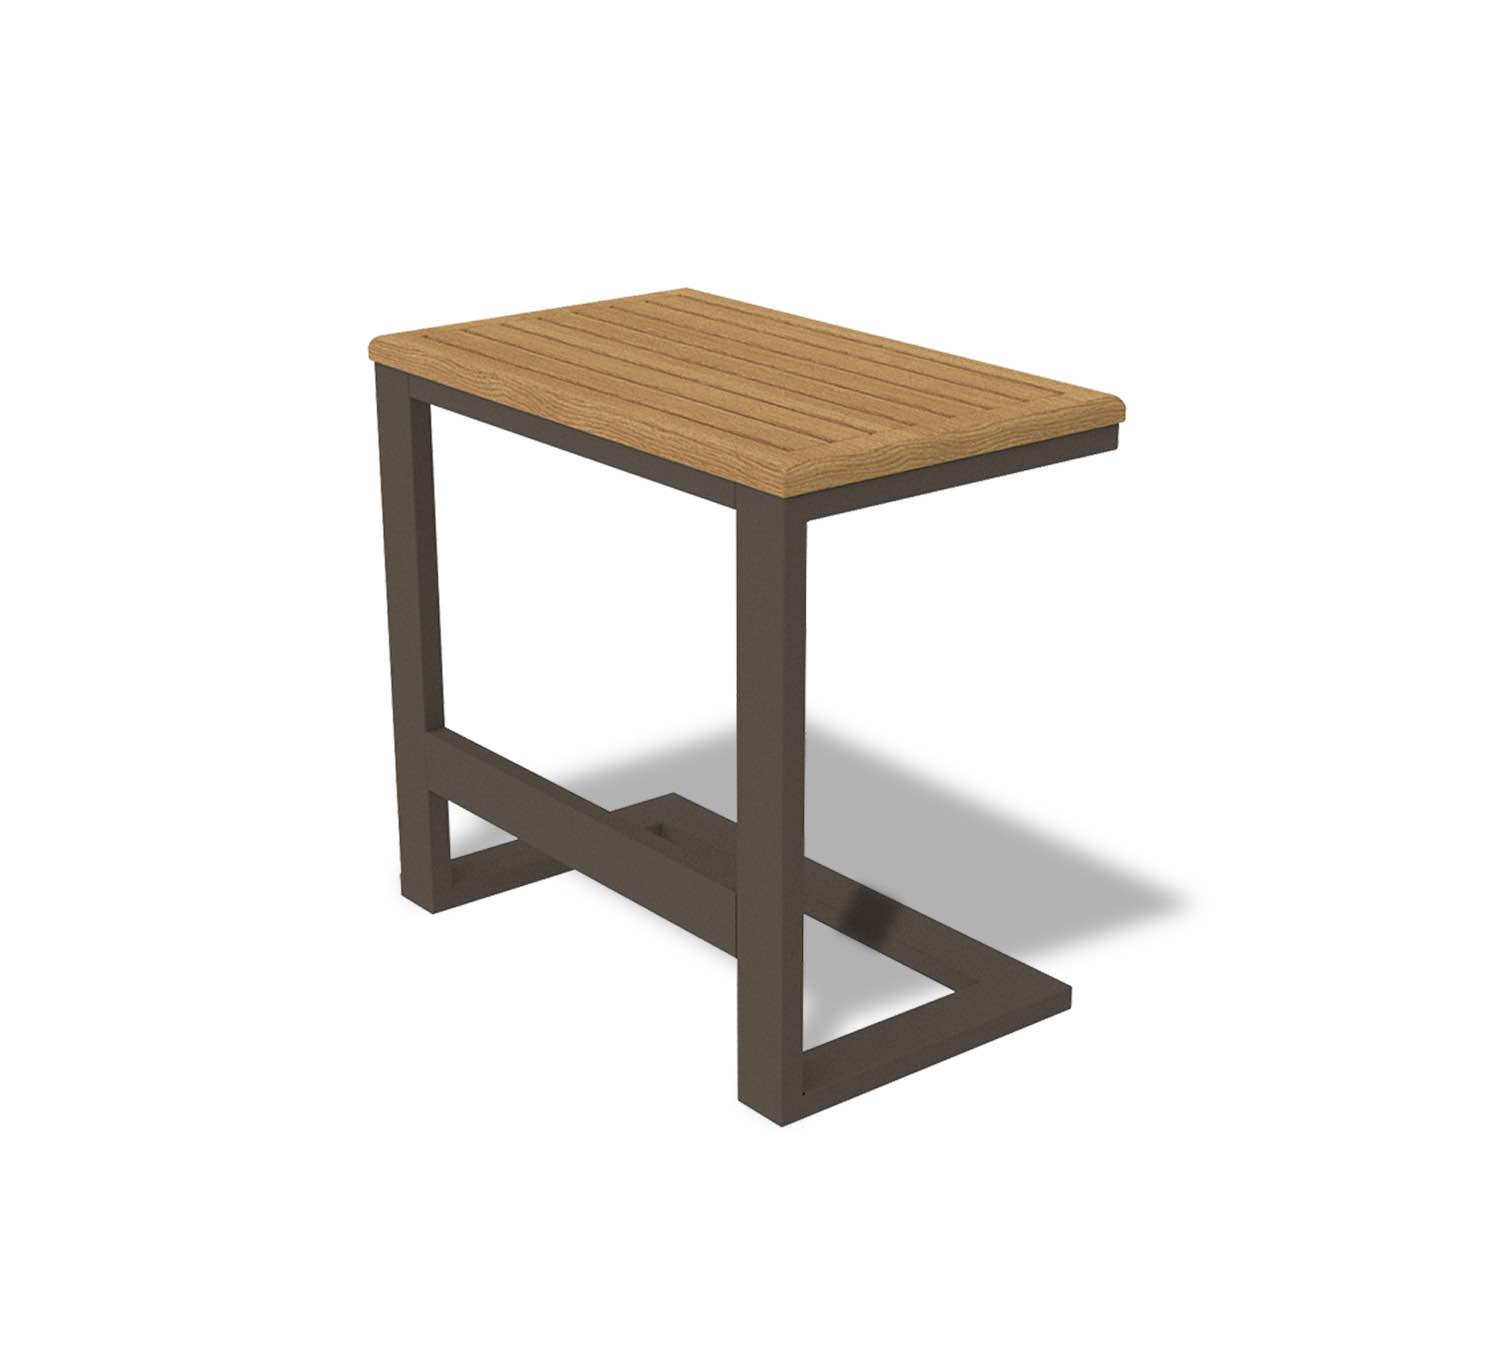 MOORE SIDE TABLE